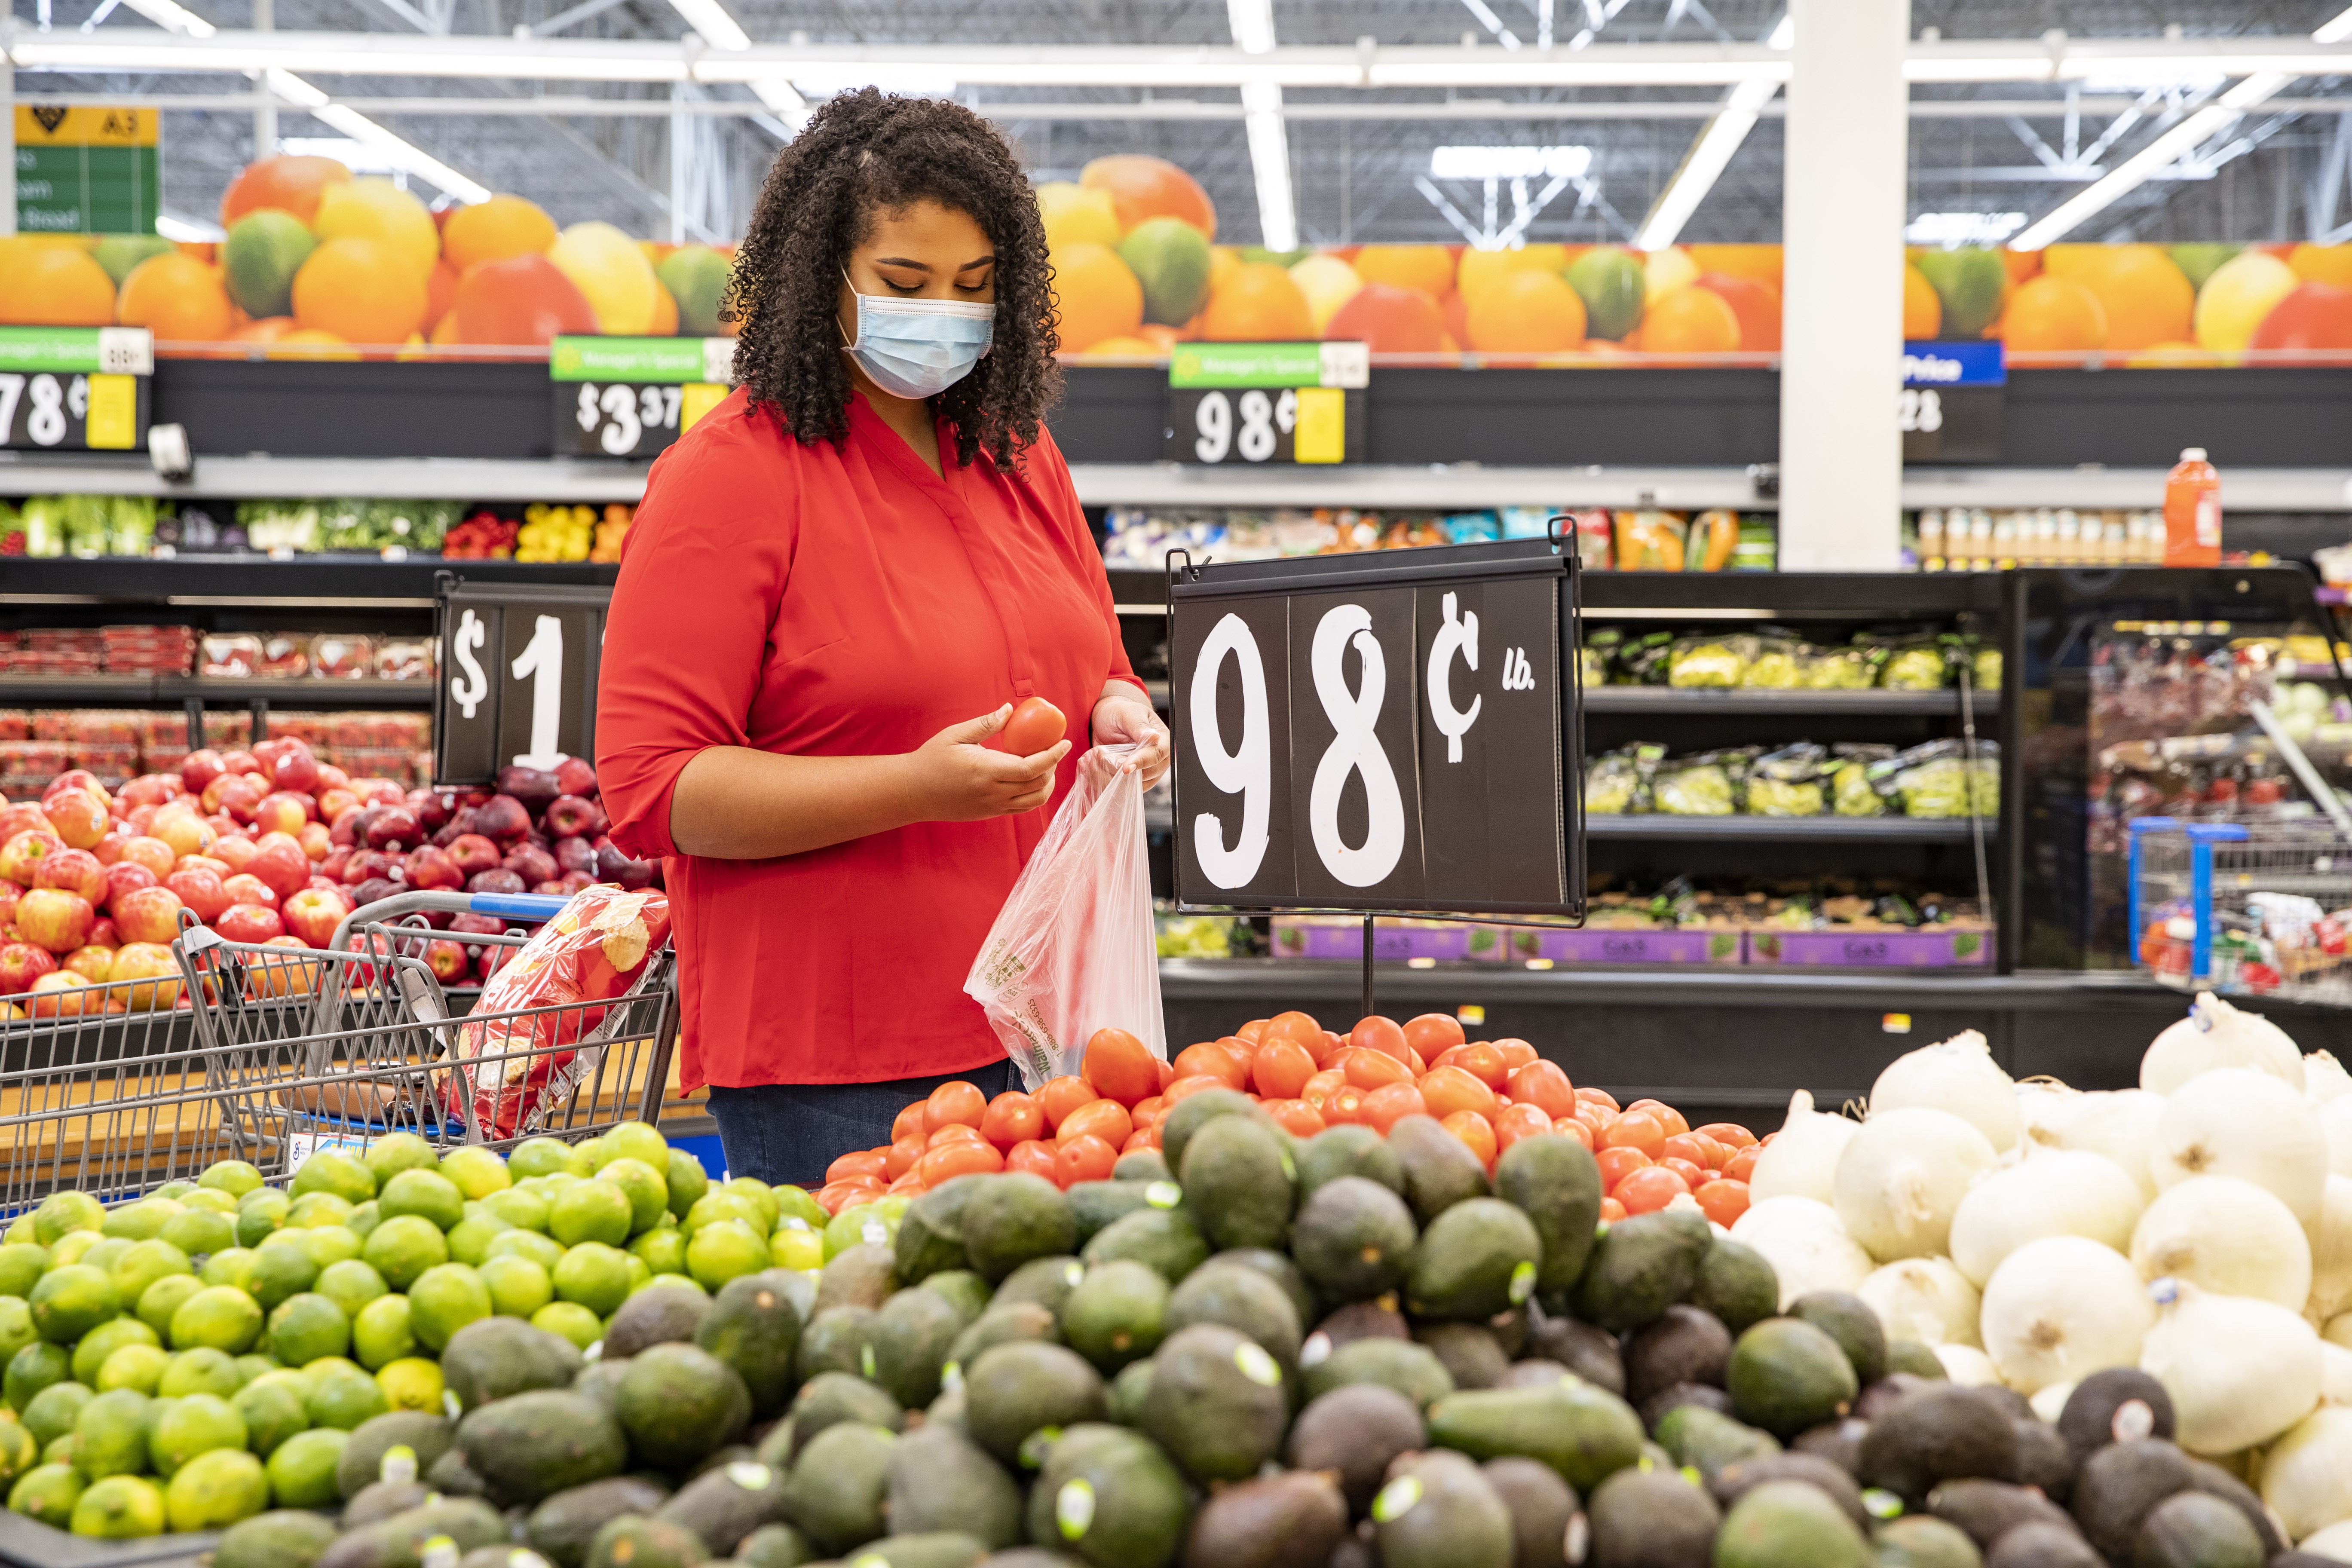 Walmart Will Require Face Masks to Shop Inside - The same applies to the Sam's Club. #Walmart #SamsClub #FaceMasks From the beginning of the COVID-19 pandemic, our focus and priority has been and continues to be on the health and safety of our associates, members and customers. - Customer wearing masks while shopping